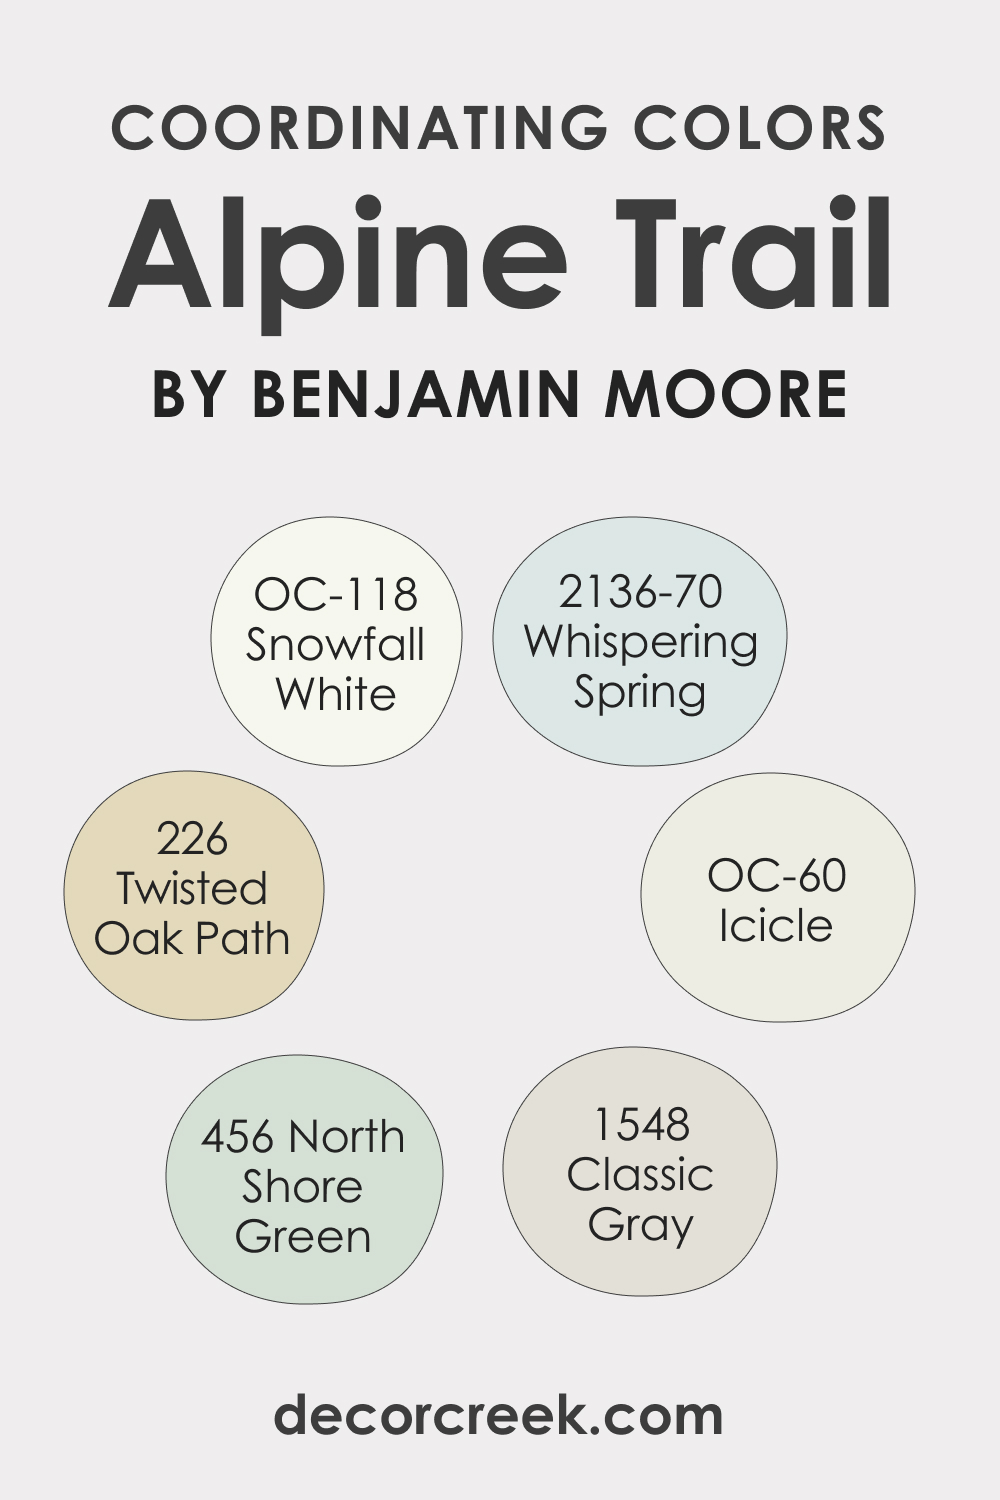 Coordinating Colors of Alpine Trail 622